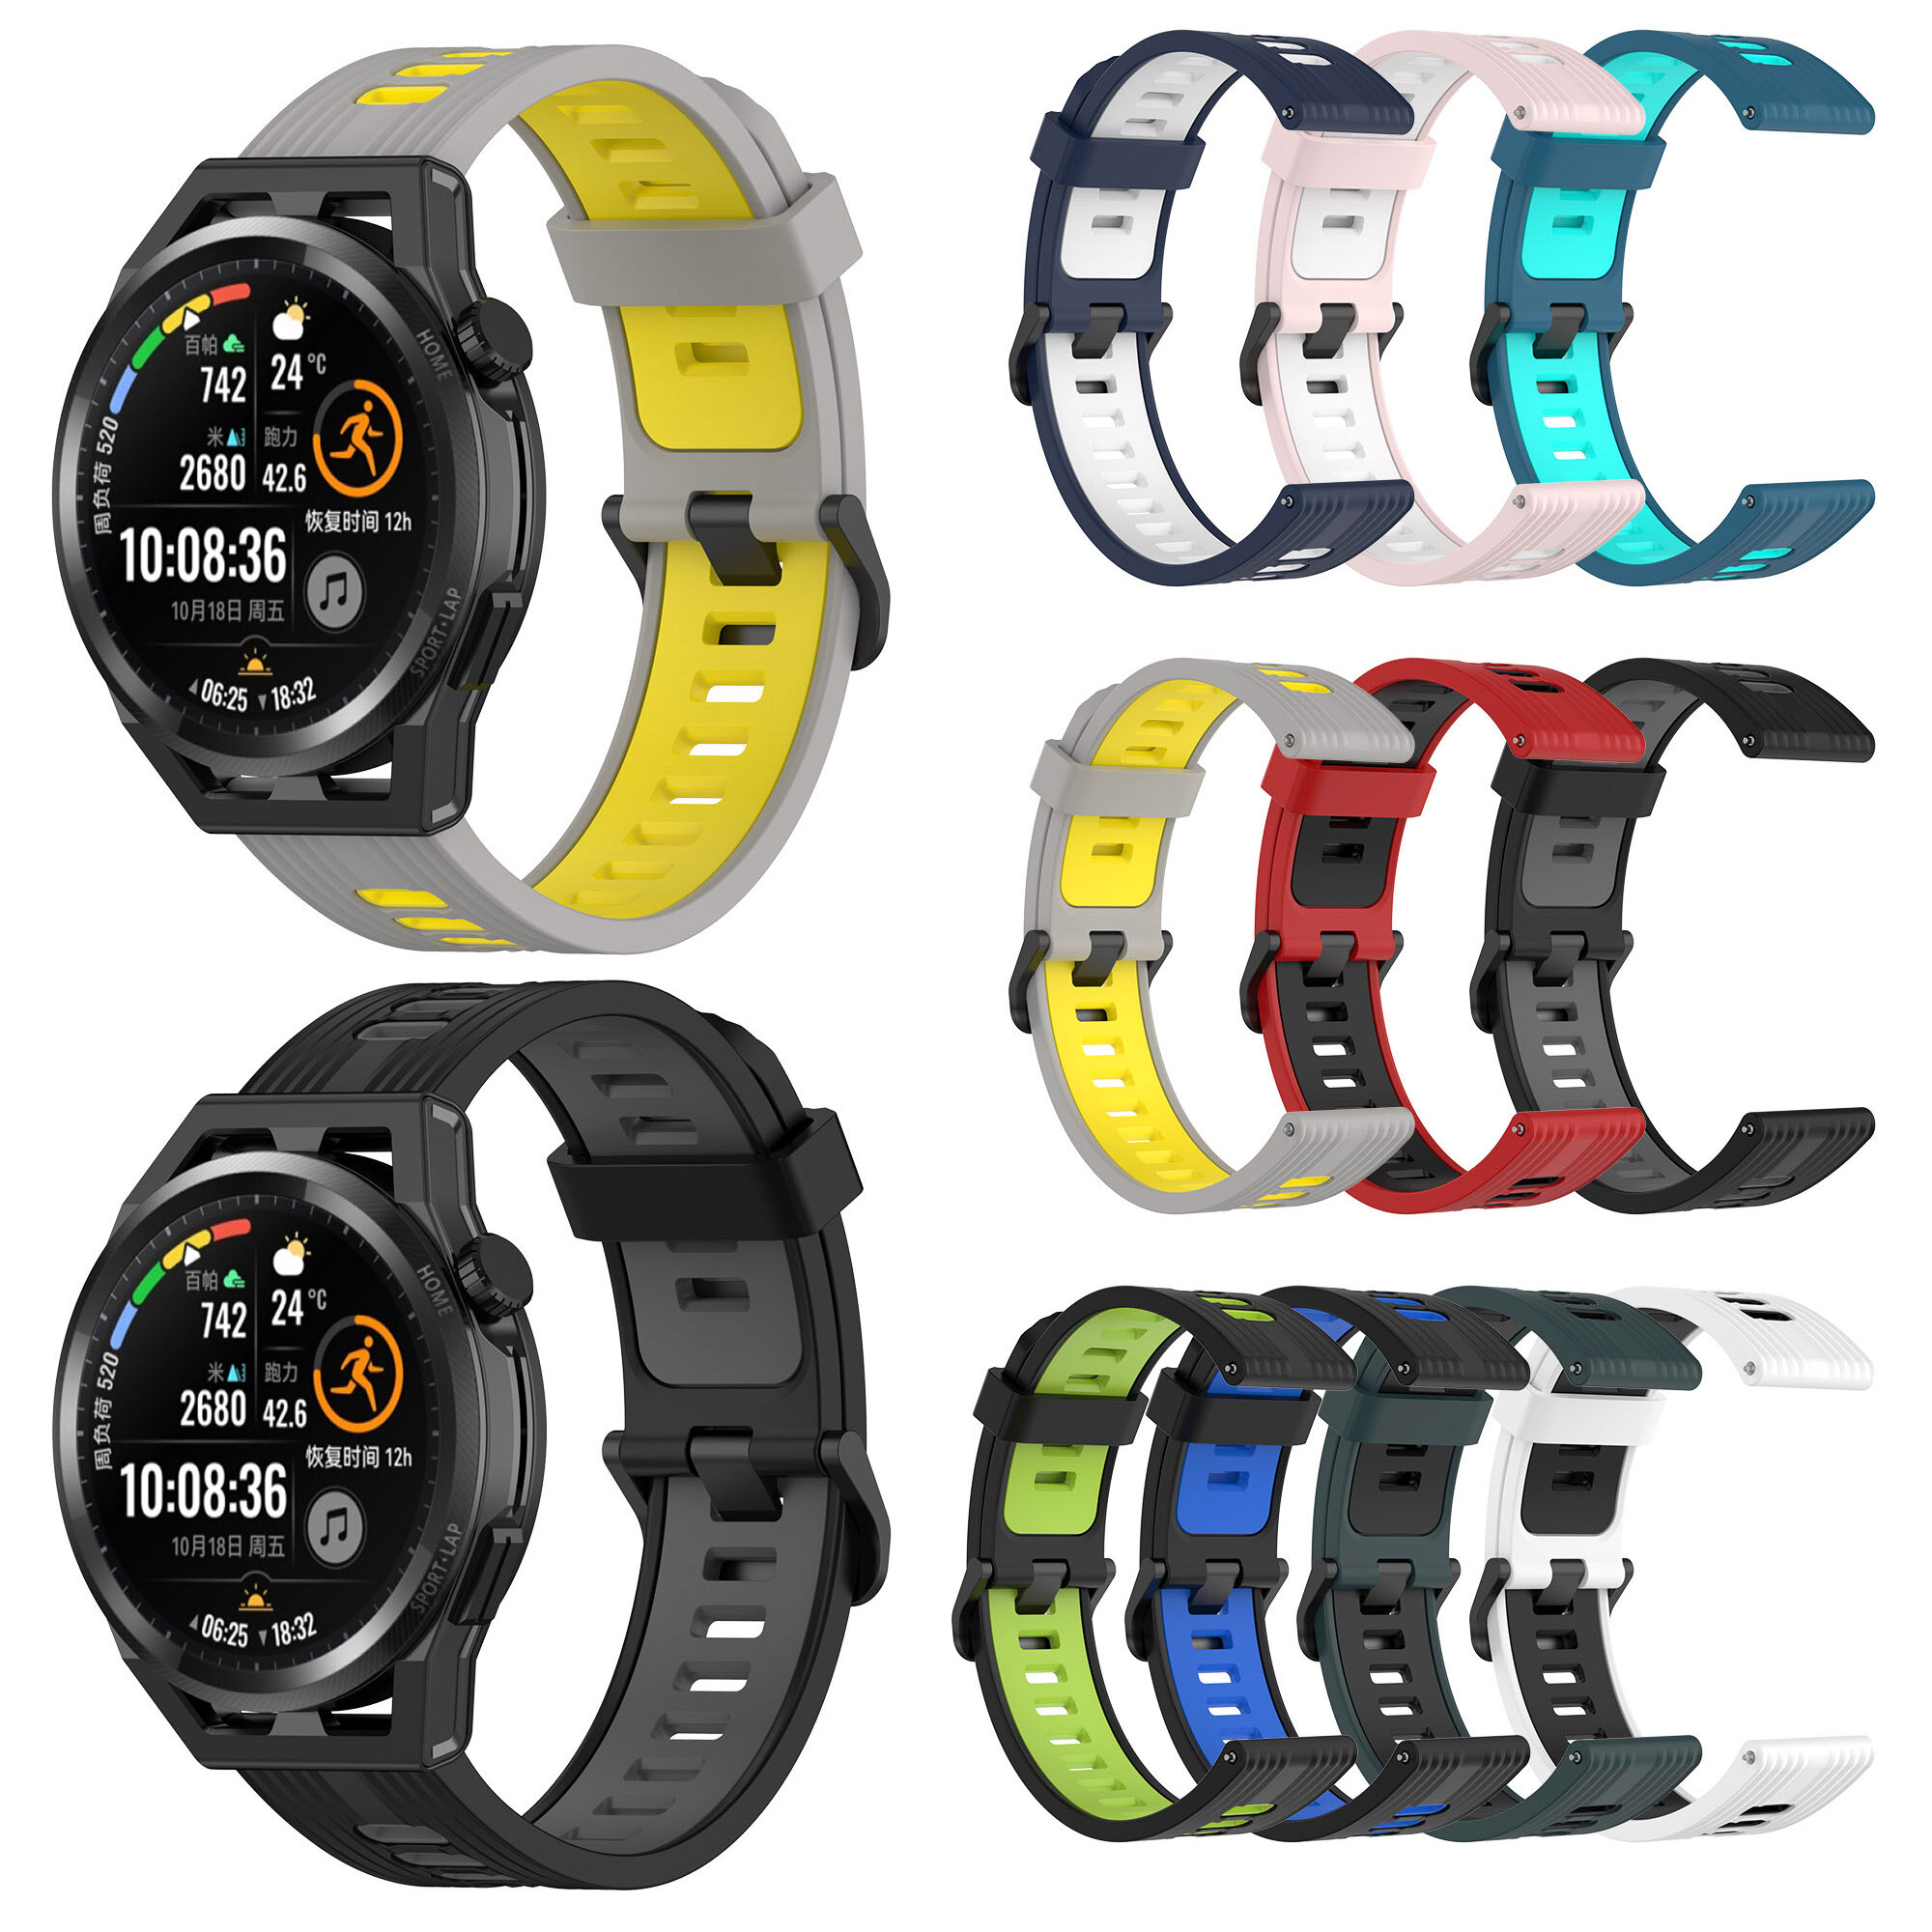 

Bakeey 20/22mm Width Comfortable Breathable Sweat proof Soft Silicone Watch Band Strap Replacement for Huawei Watch GT R